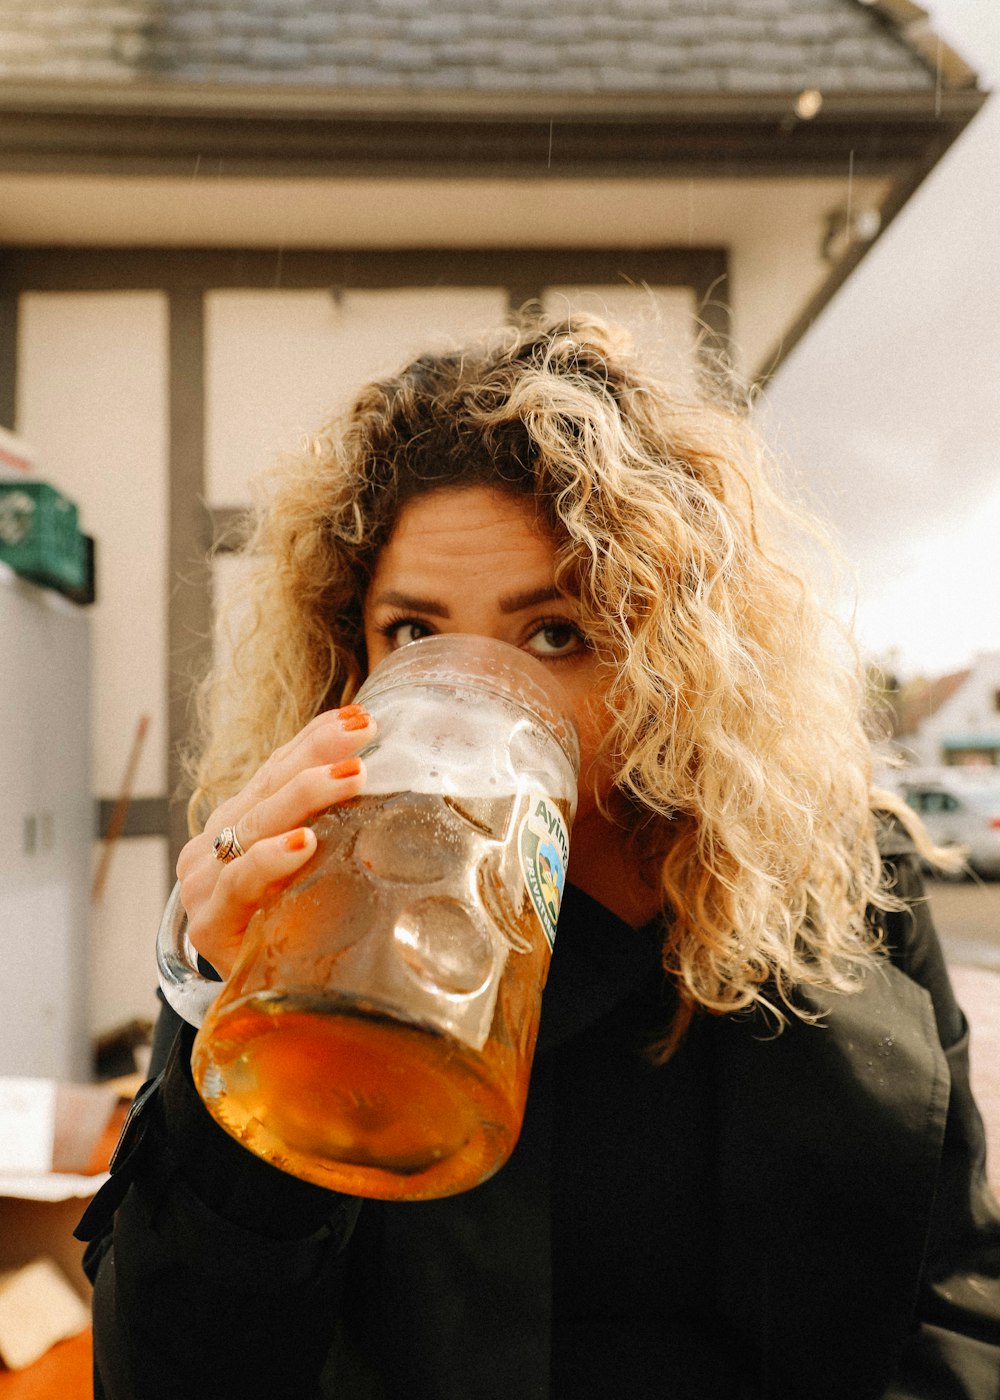 woman drinking from clear glass mug